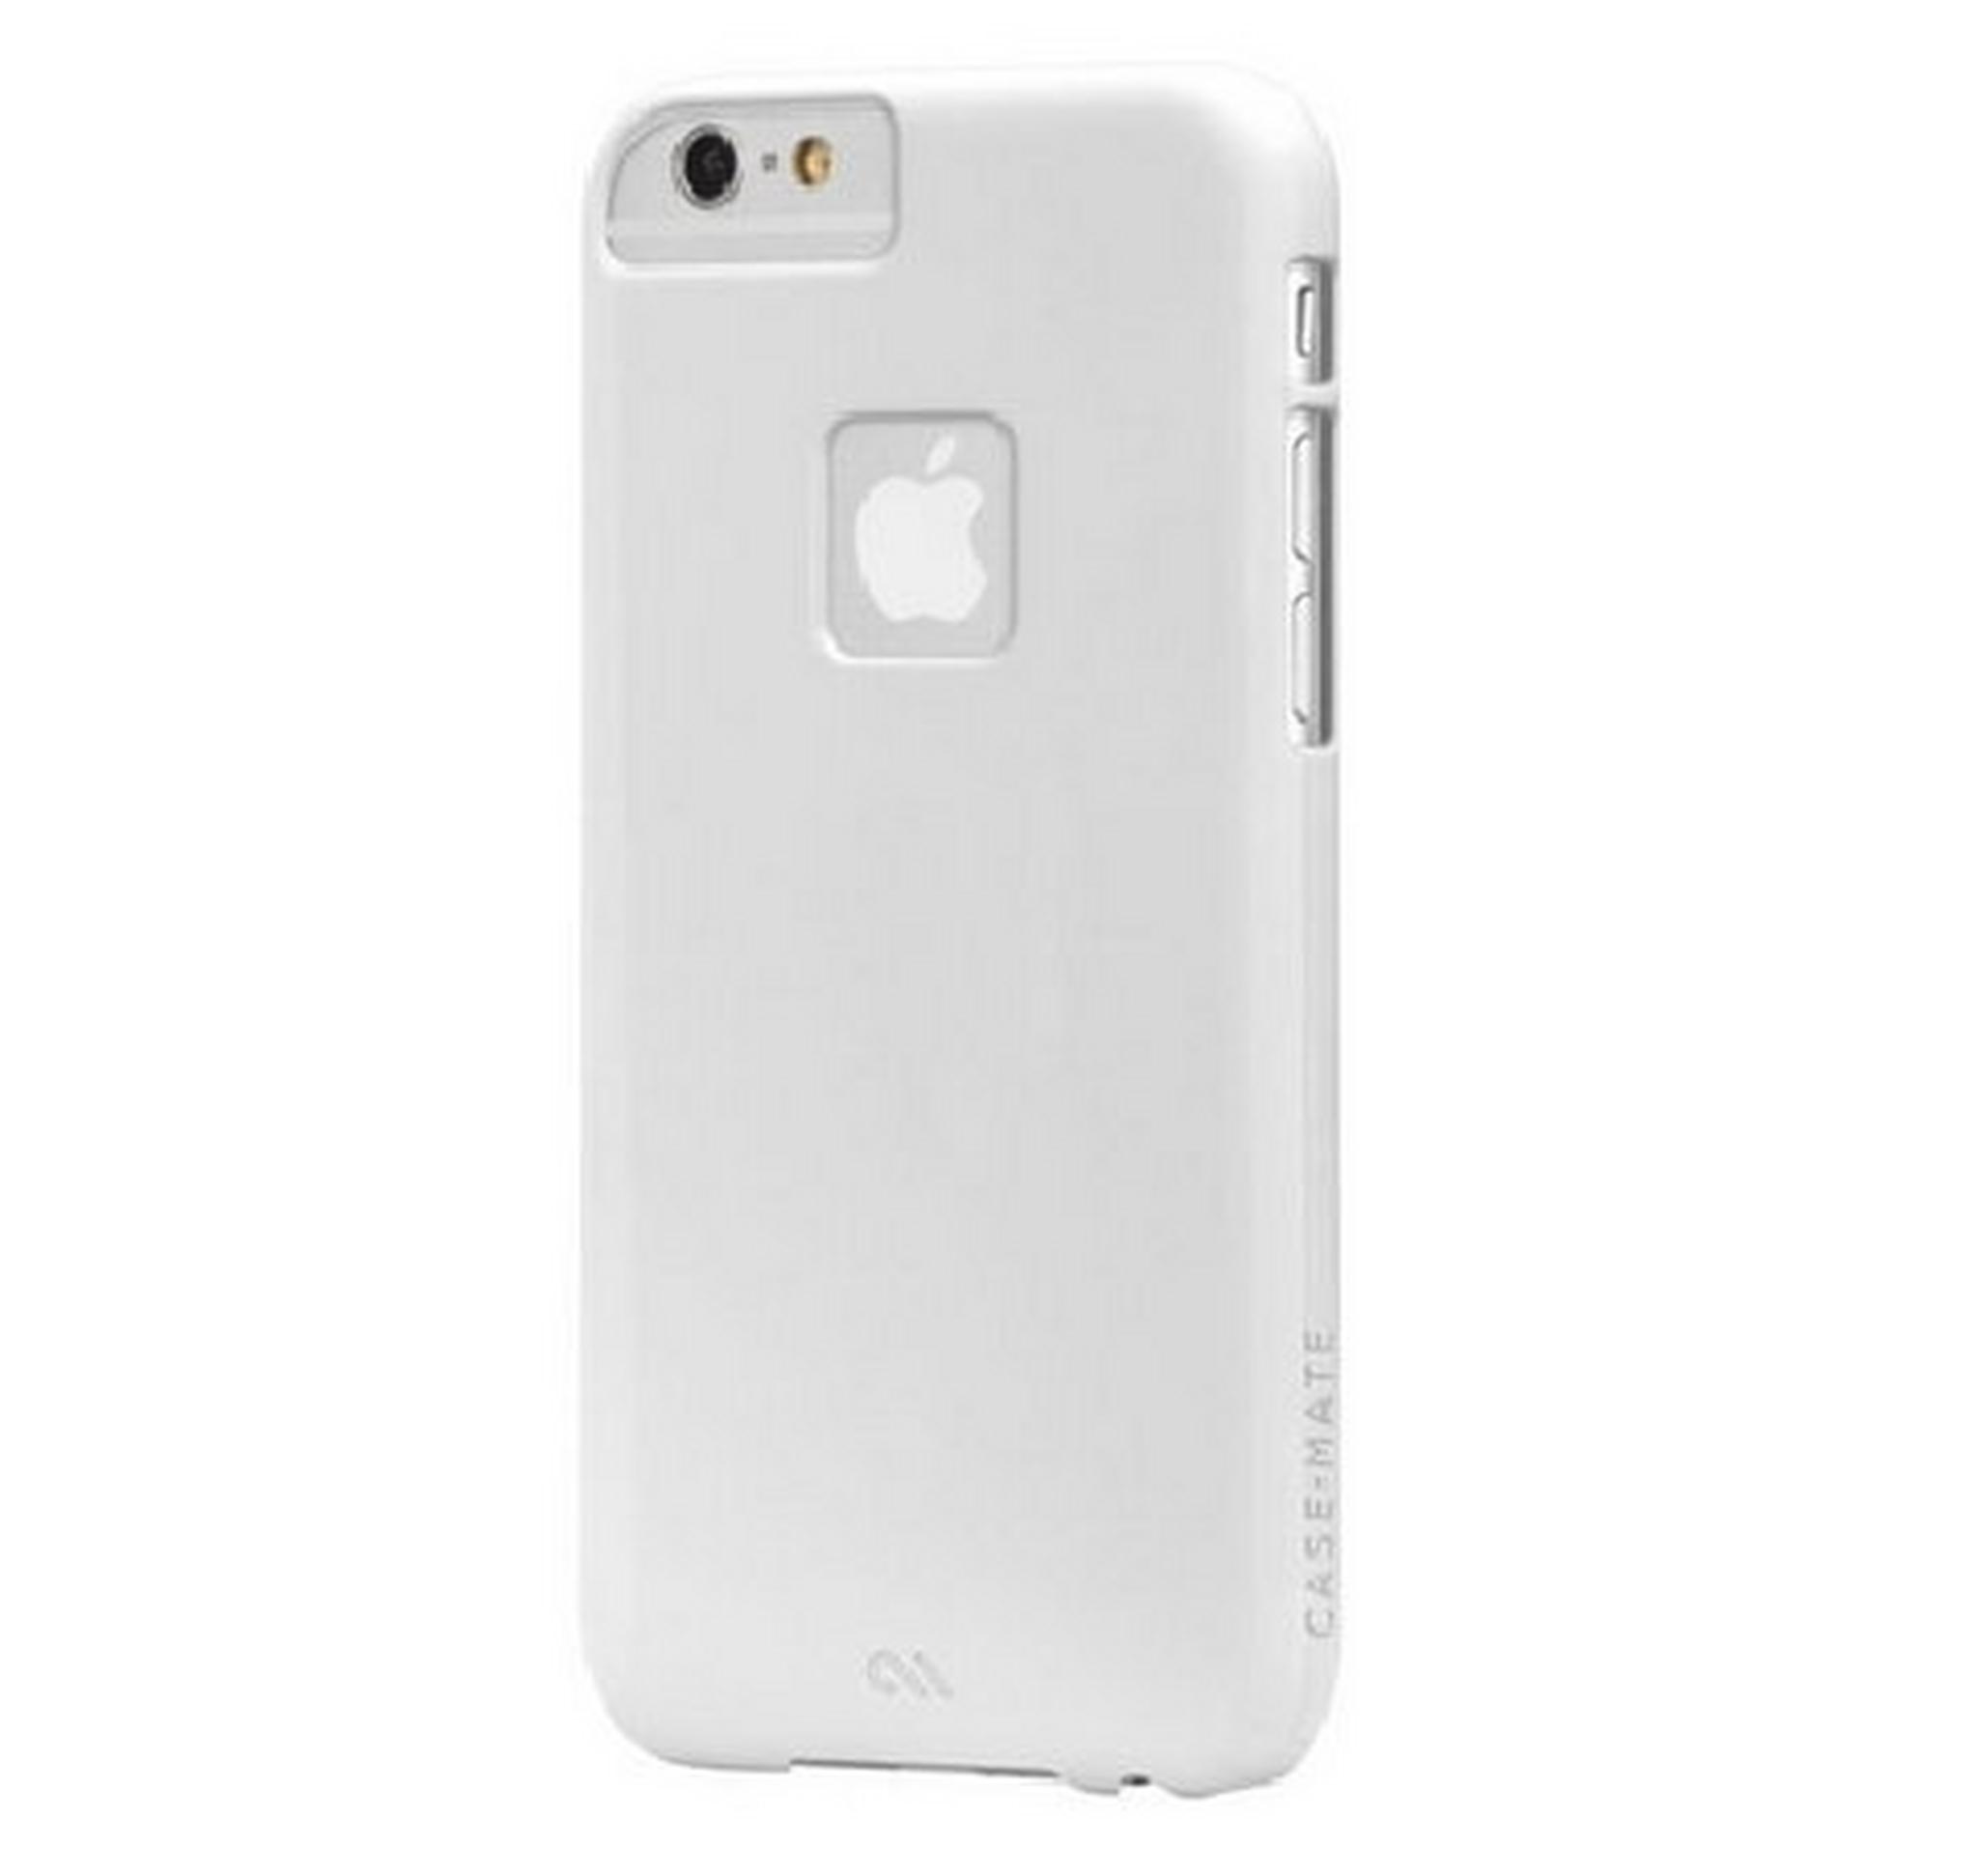 Case Mate Barely There Case for iPhone 6 - White